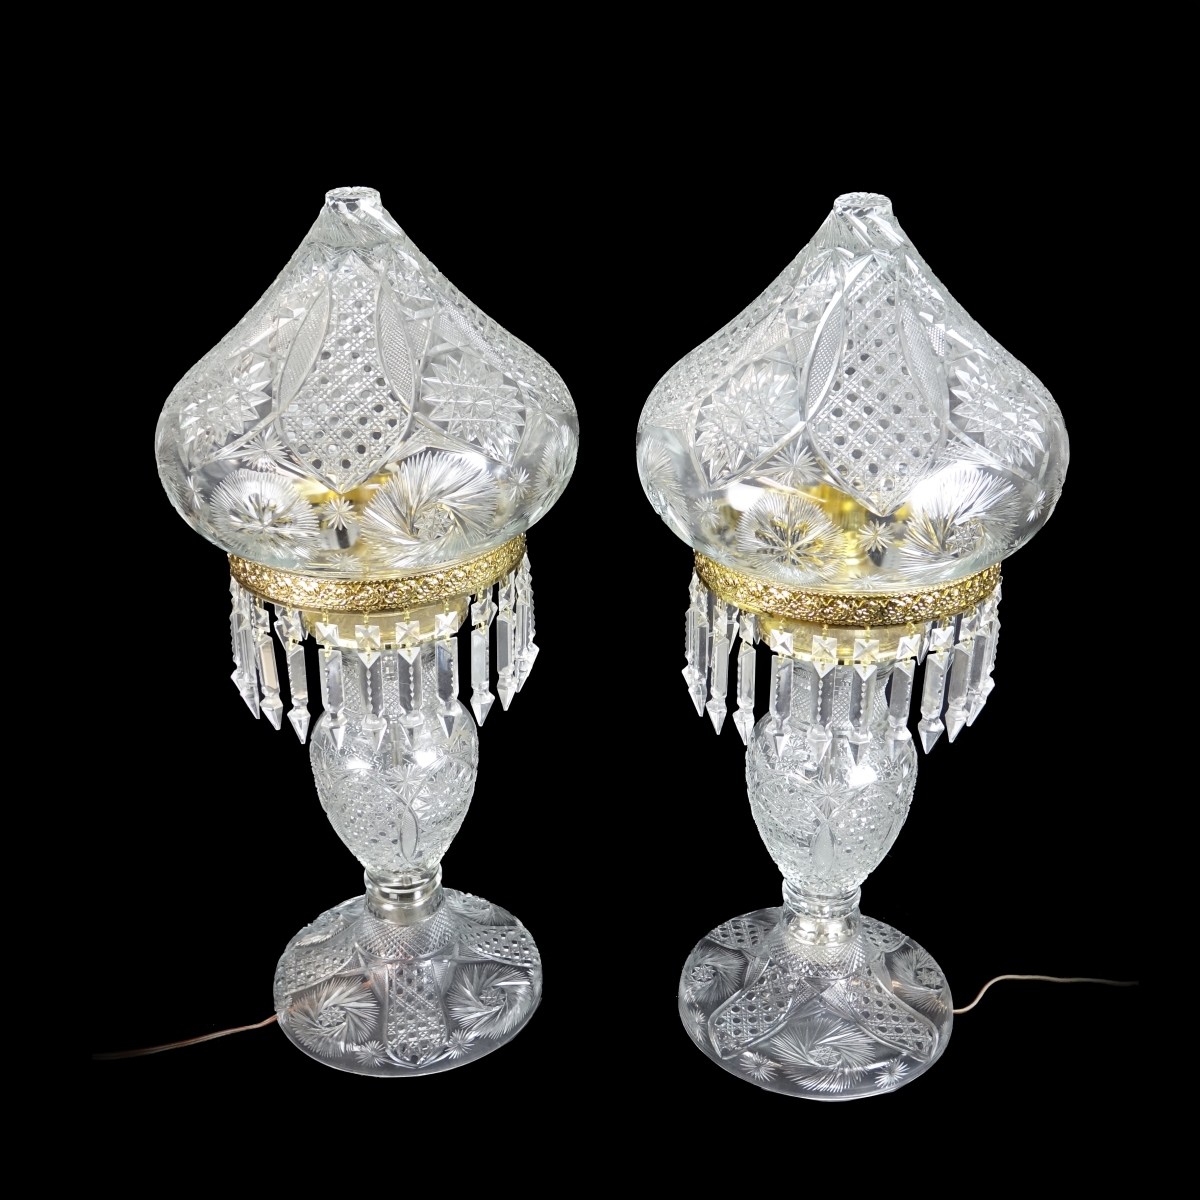 Pair of Cut Crystal Dome Lamps